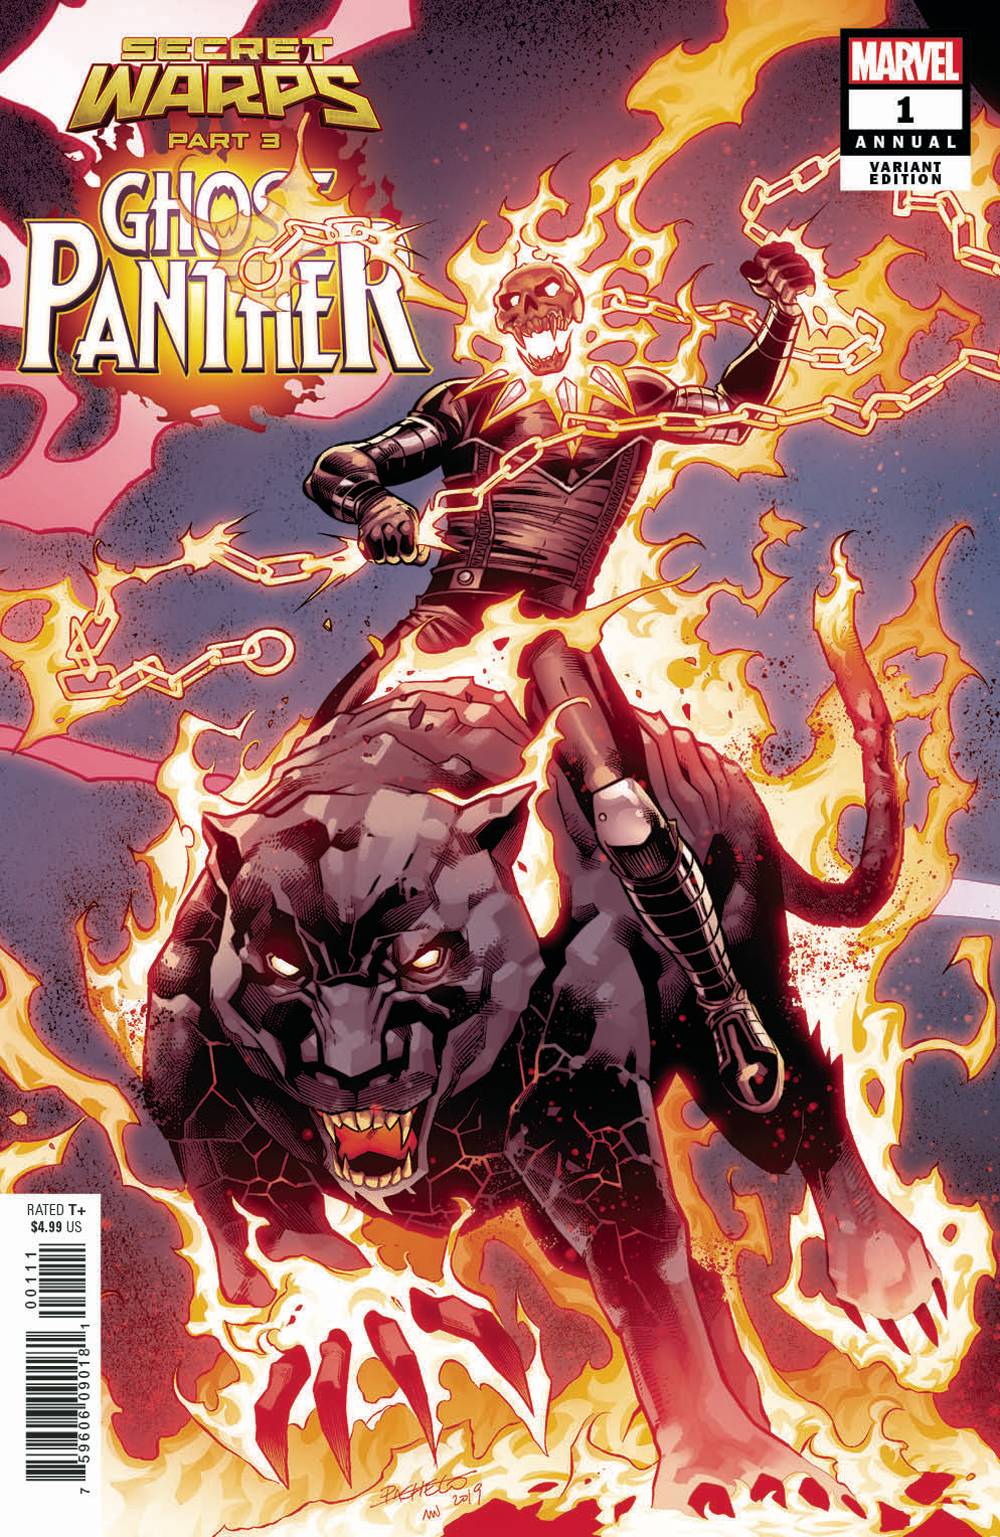 SECRET WARPS GHOST PANTHER ANNUAL #1 PACHECO CONNECTING VARIANT 07/17/19 FOC 06/24/19